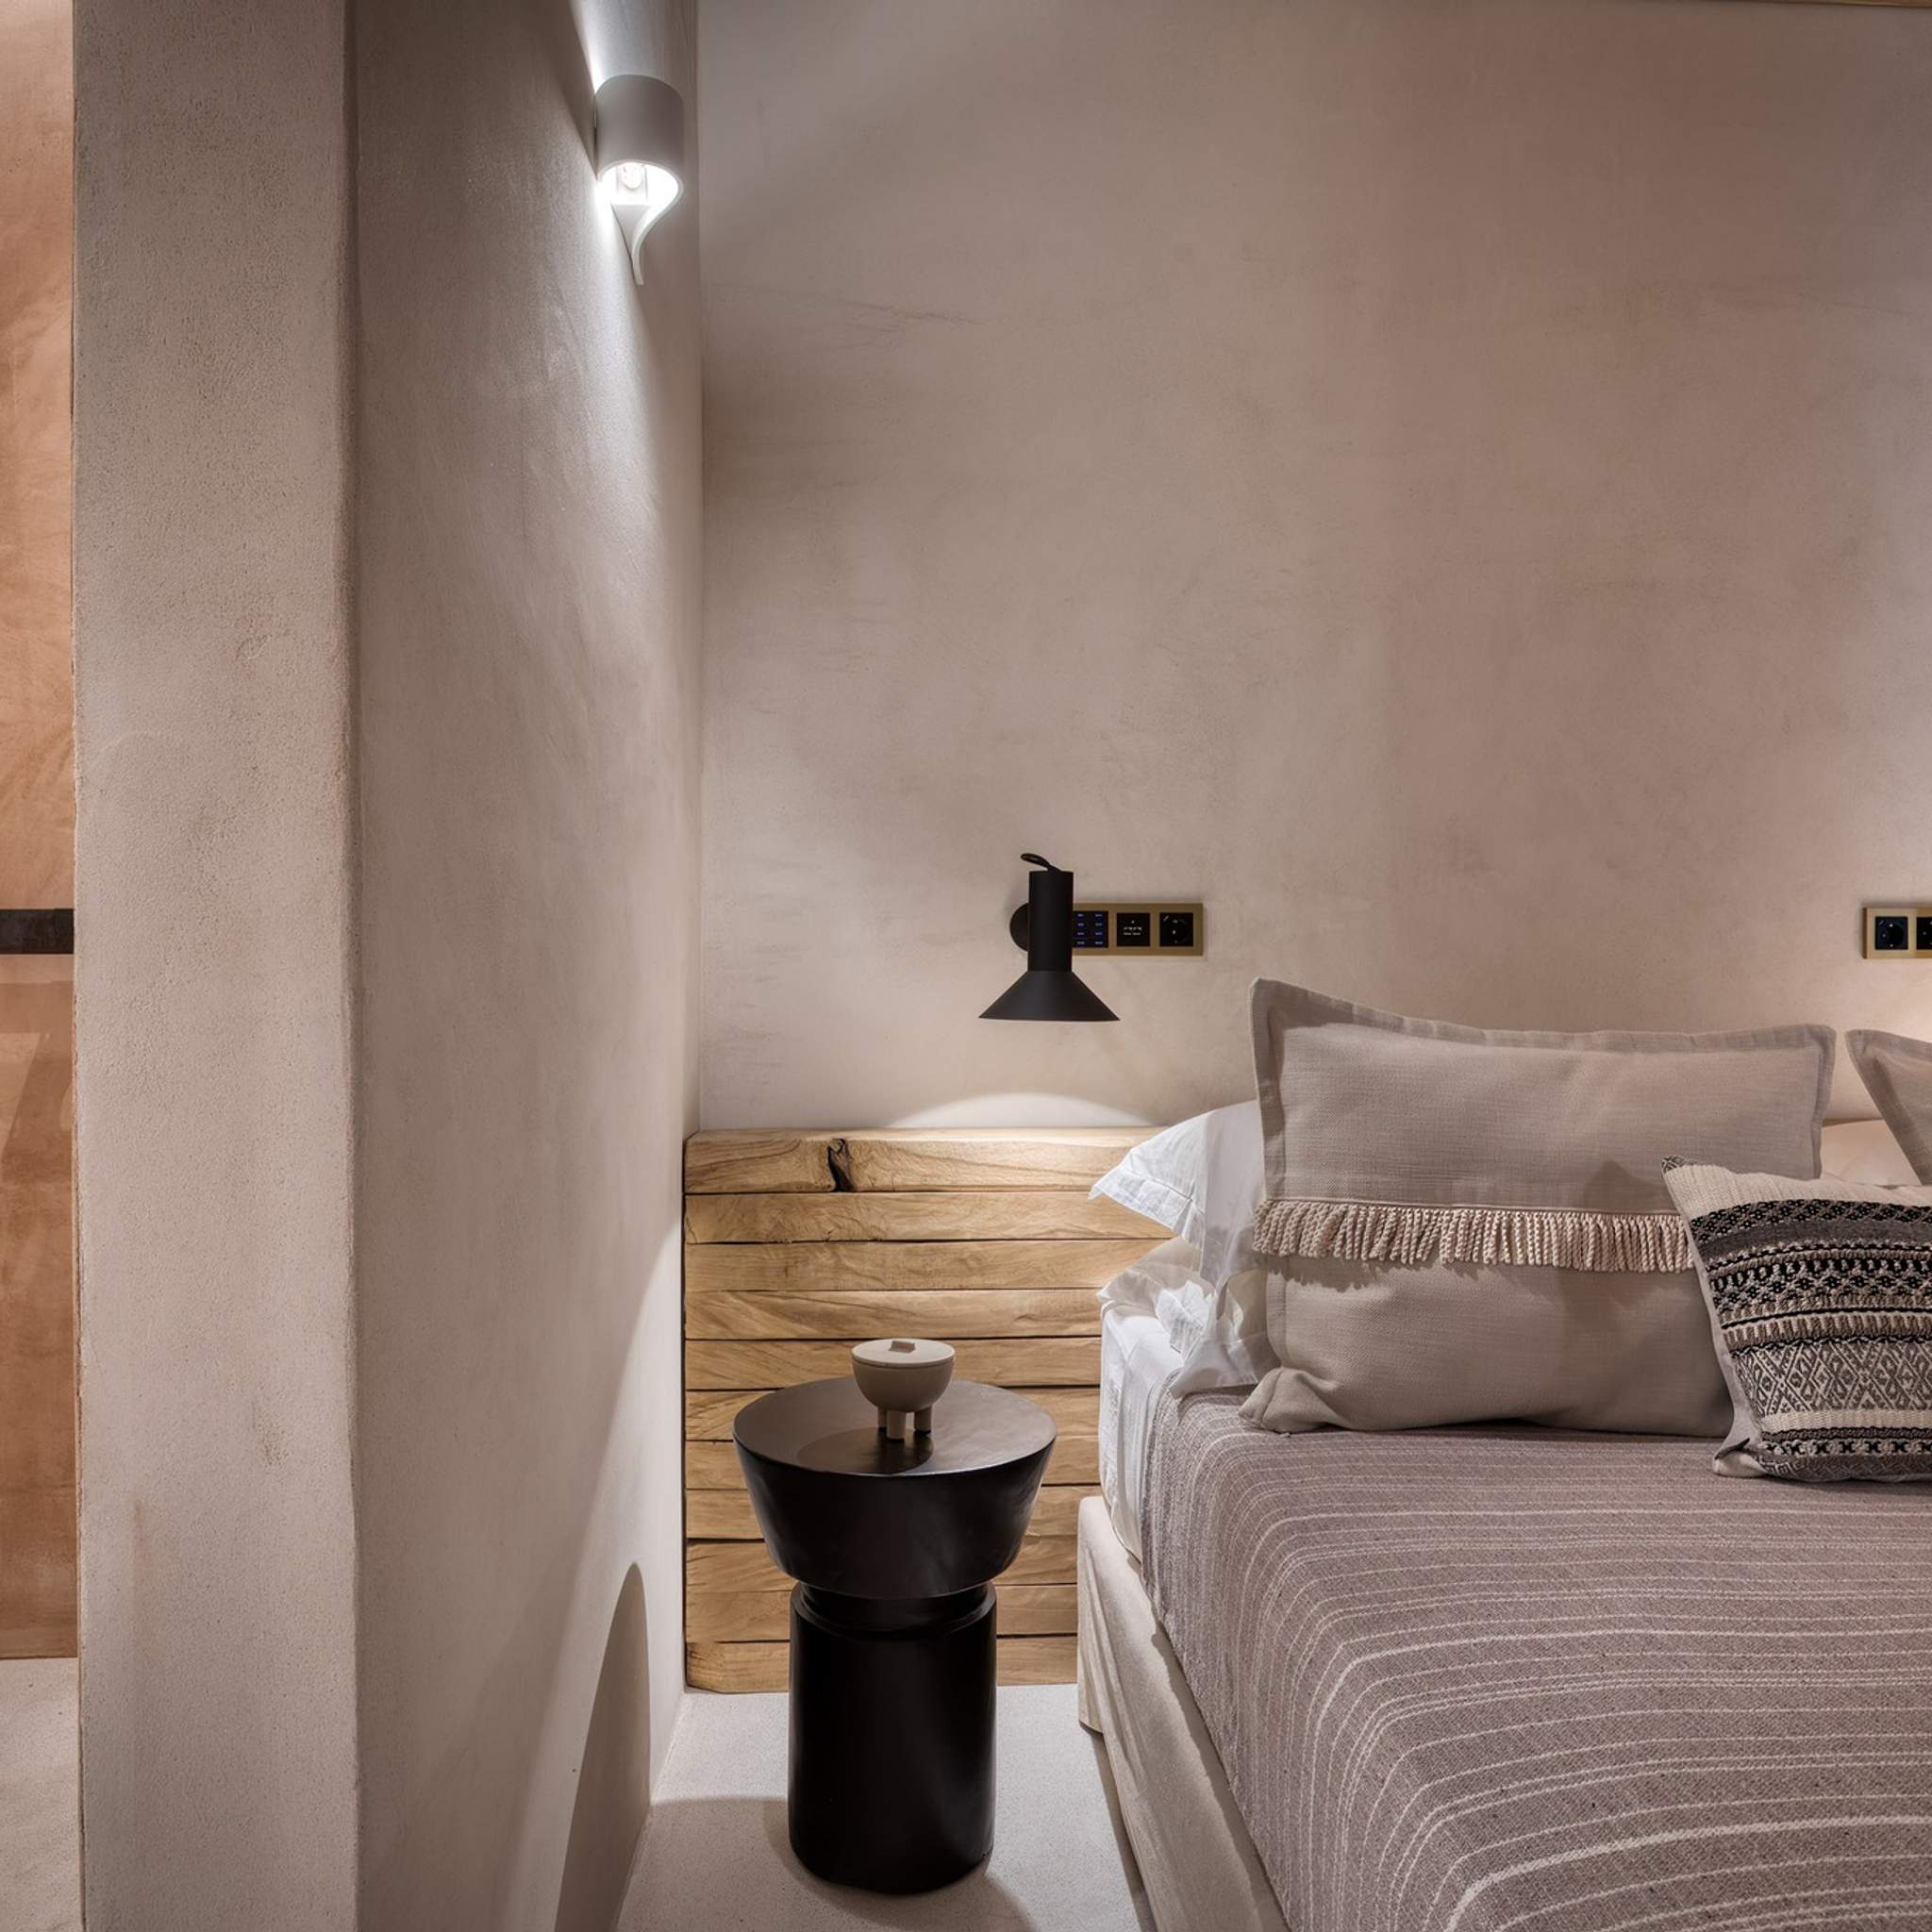 Iremia. Step into a dreamy sanctuary where tranquility meets luxury. Our breathtaking bedroom is a haven of serenity, inviting you to unwind and embrace blissful moments of relaxation. Escape to paradise!
.
#amalgamhomes #artofcomfort #greece #visitgreece #greekislands #cyclades #greekislands #paros #naxos #mykonos #tinos #ampelas #kastraki #triantaros #travel #wanderlust #greeksummer #discovergreece